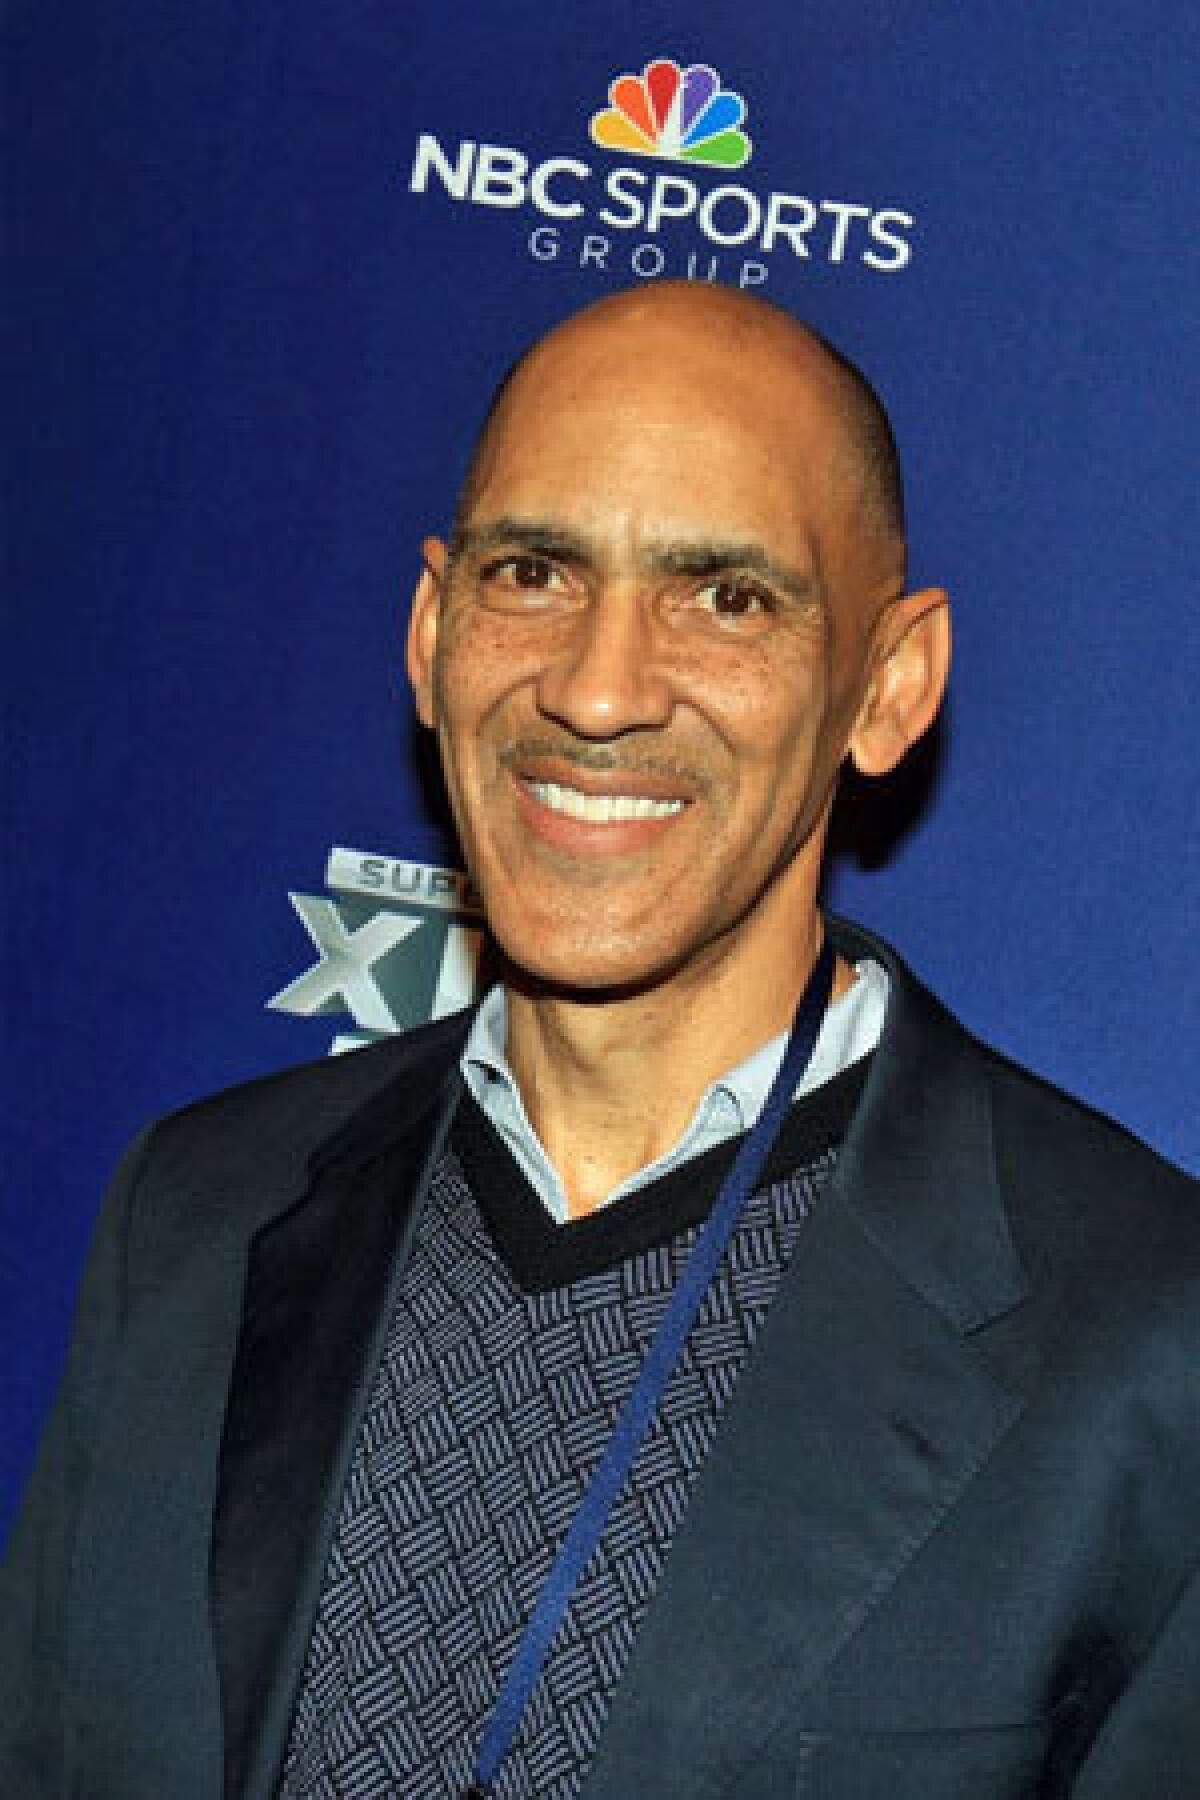 Former Colts coach Tony Dungy says he has no plans to coach again any time soon.